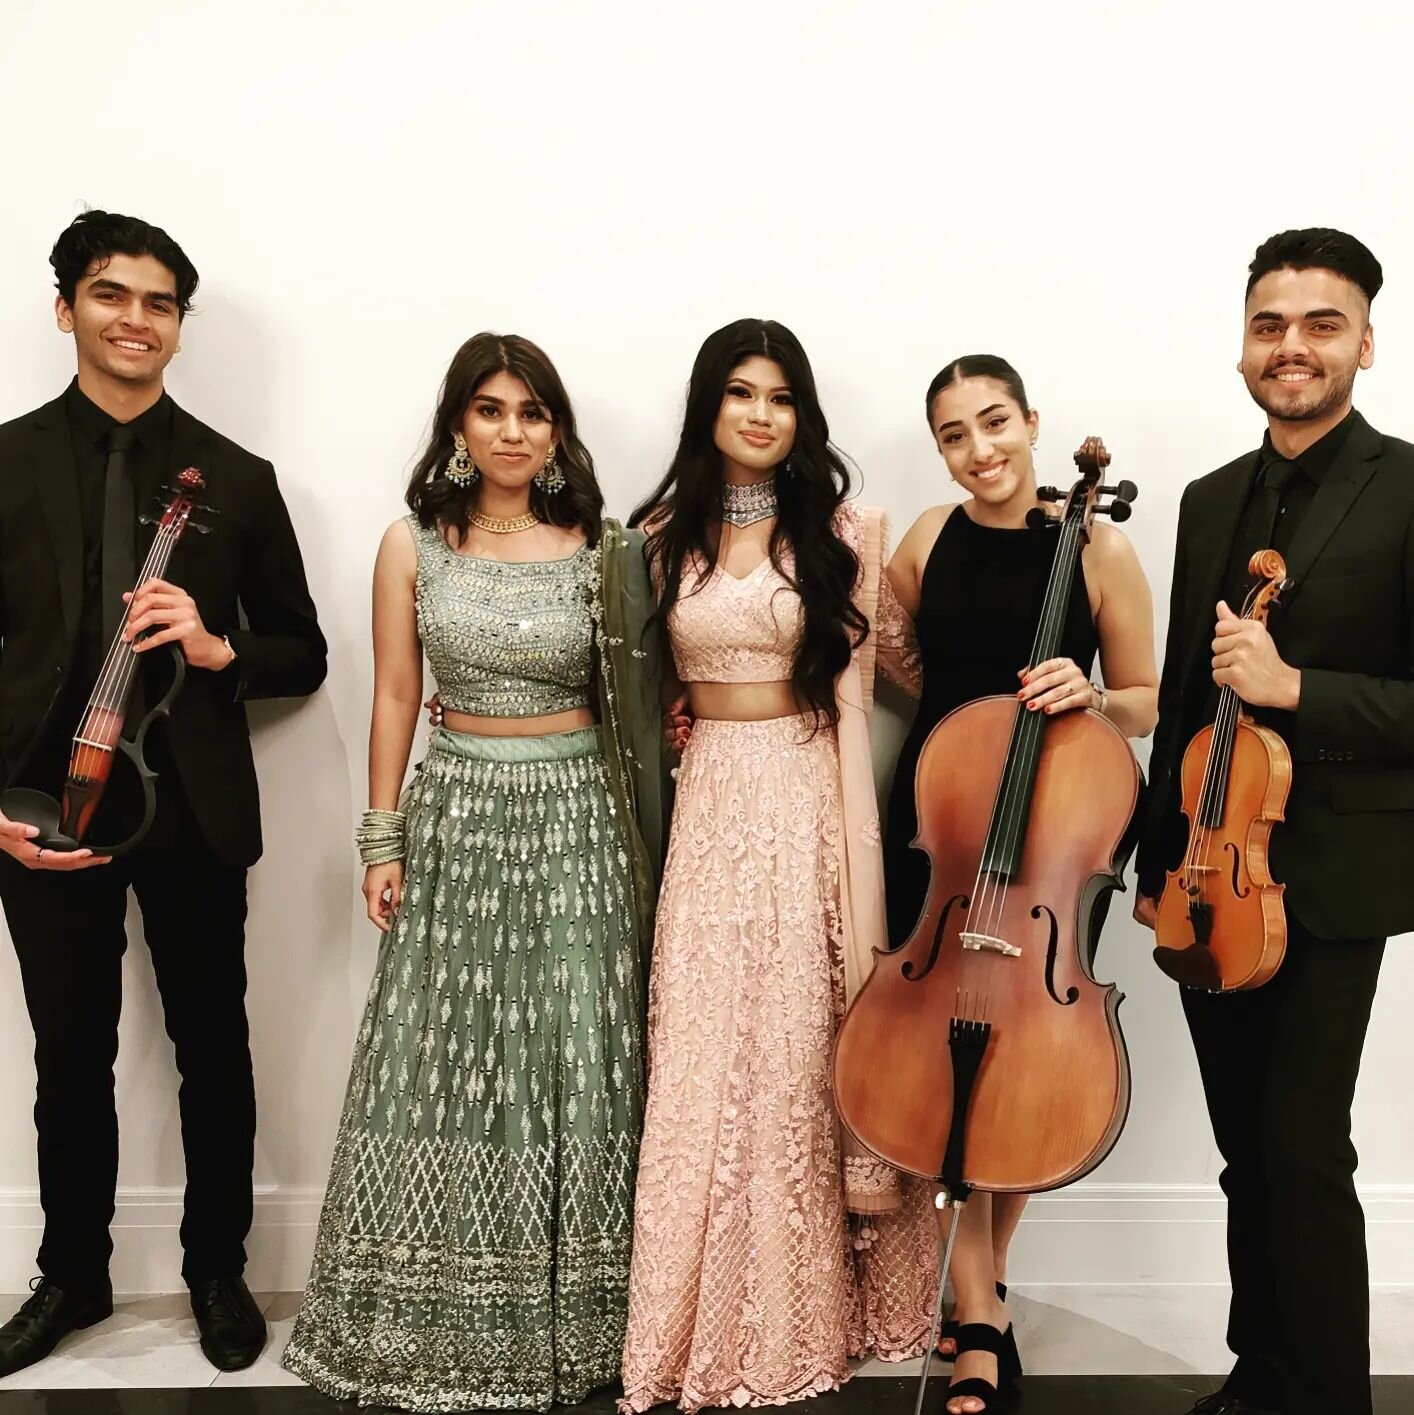 The Rosemont Trio played classical covers of Bollywood music for this beautiful Indian wedding. Just look at those dresses!

Congratulations to Nilufer and Soheil! 

#bollywood #classicalmusic #stringtrio #violin #cello #indian #classical #rosemont #